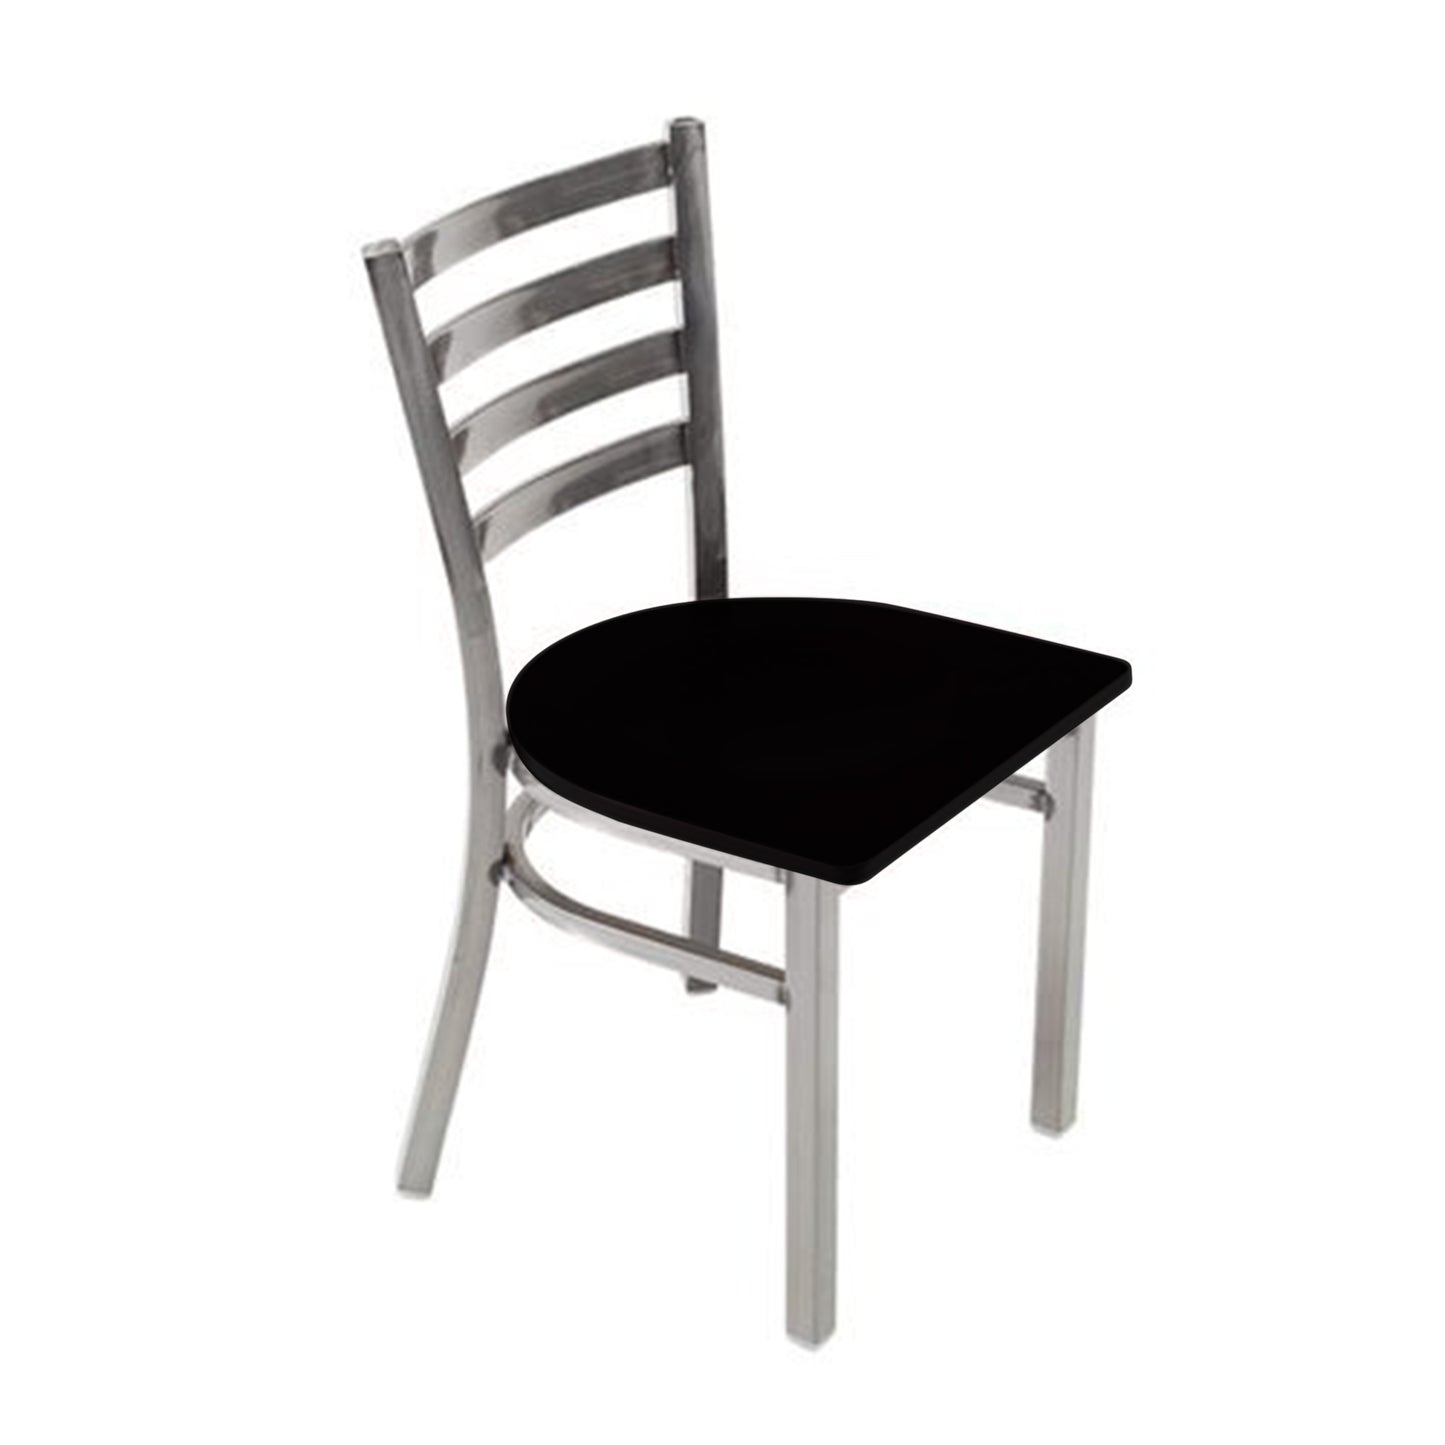 AmTab Cafe Chair - 16.5"W x 17"L x 32.25"H - Seat Height 17.25"H  (AMT-CAFECHAIR-3)